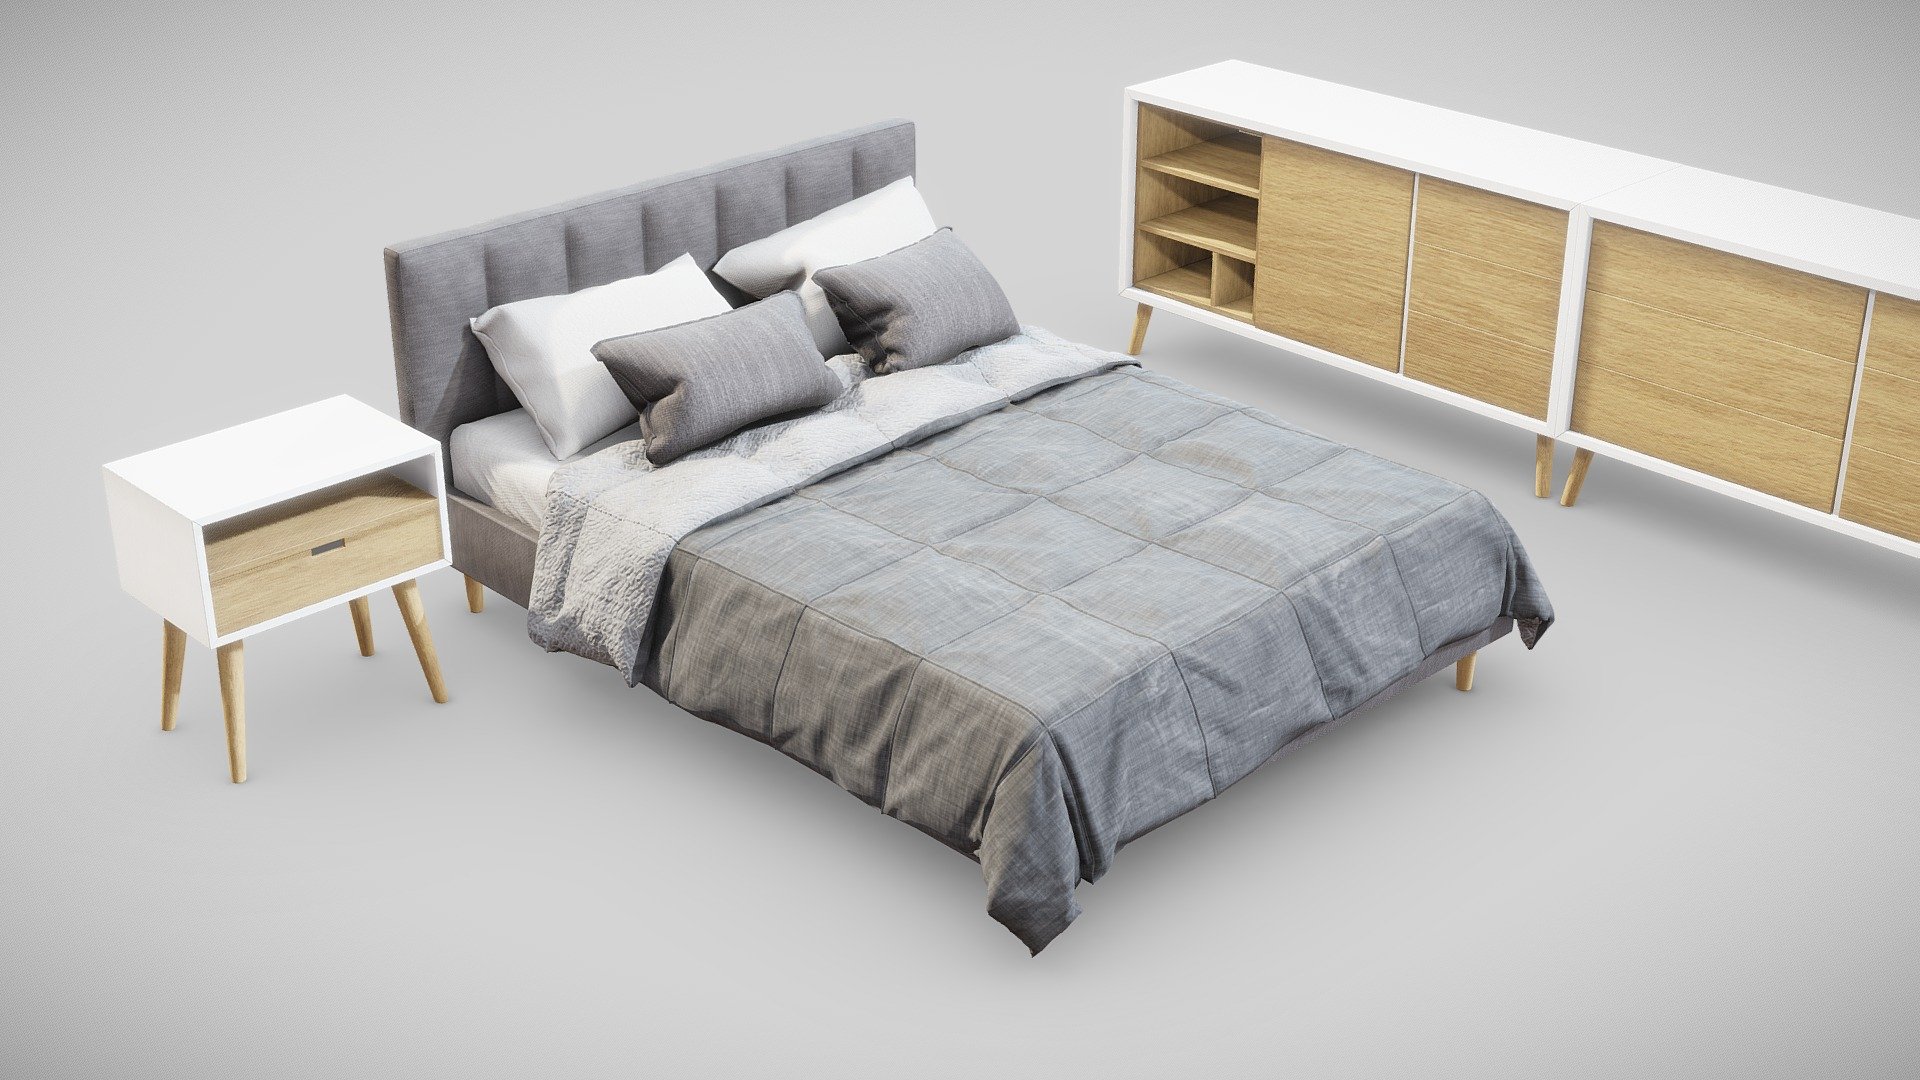 Additional File Include:
Formats: BLEND version 3.2 | FBX | OBJ | MTL | STL

Textures: JPG | up to 4k

UVW Mapped: Non-overlapping

Materials: Yes

Subdivision-ready: Yes

Renders: Cycles

Material Libraries: Cycles

Full Scenes with lights: No

Model - Blender 3.2 - Upholstered Bed - Buy Royalty Free 3D model by 3DECraft 3d model